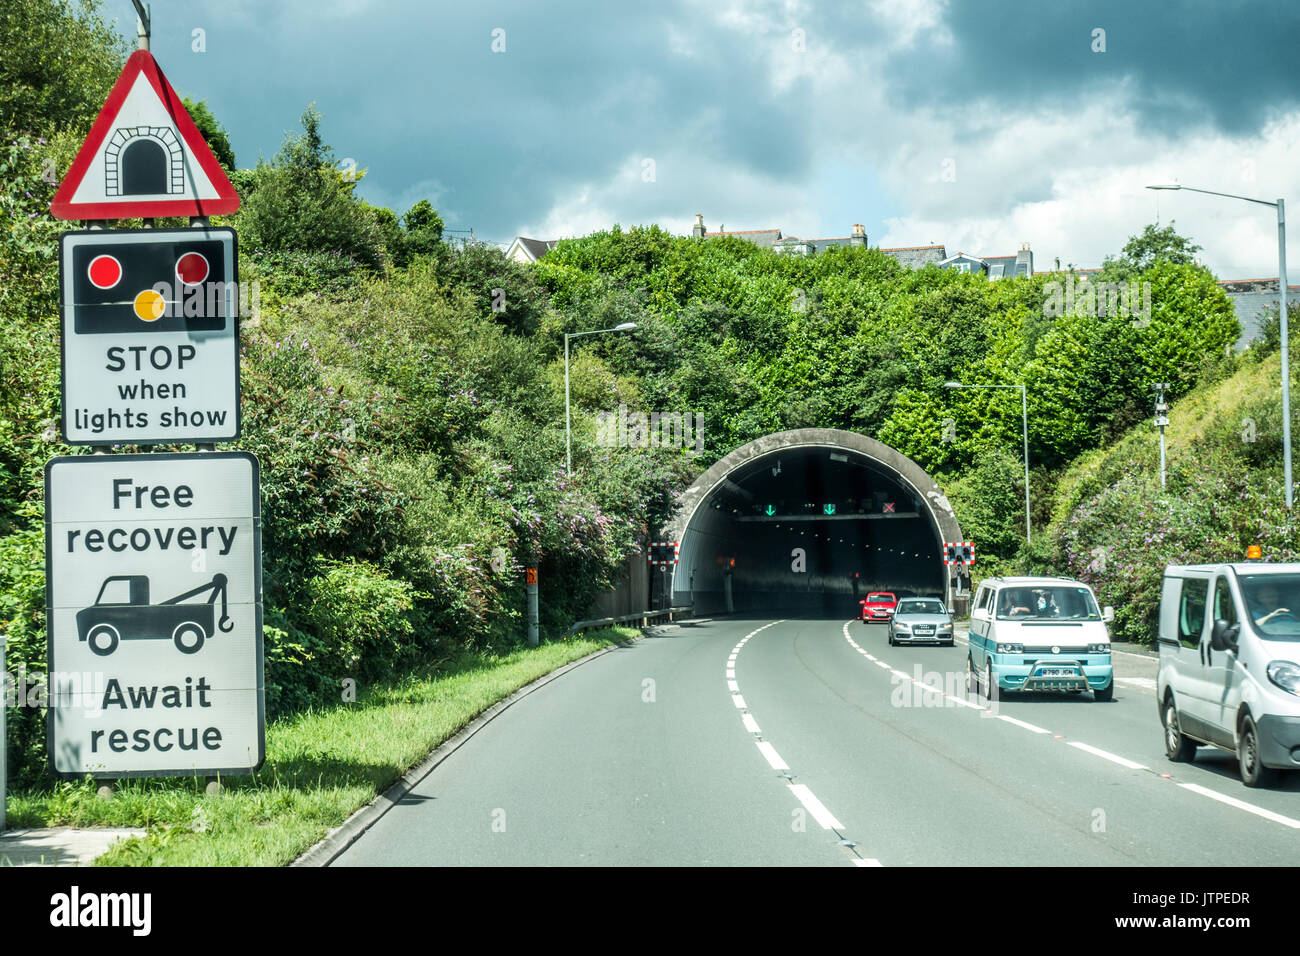 Free recovery and Await rescue sign before traffic enters a tunnel. Cornwall, England, UK. Stock Photo